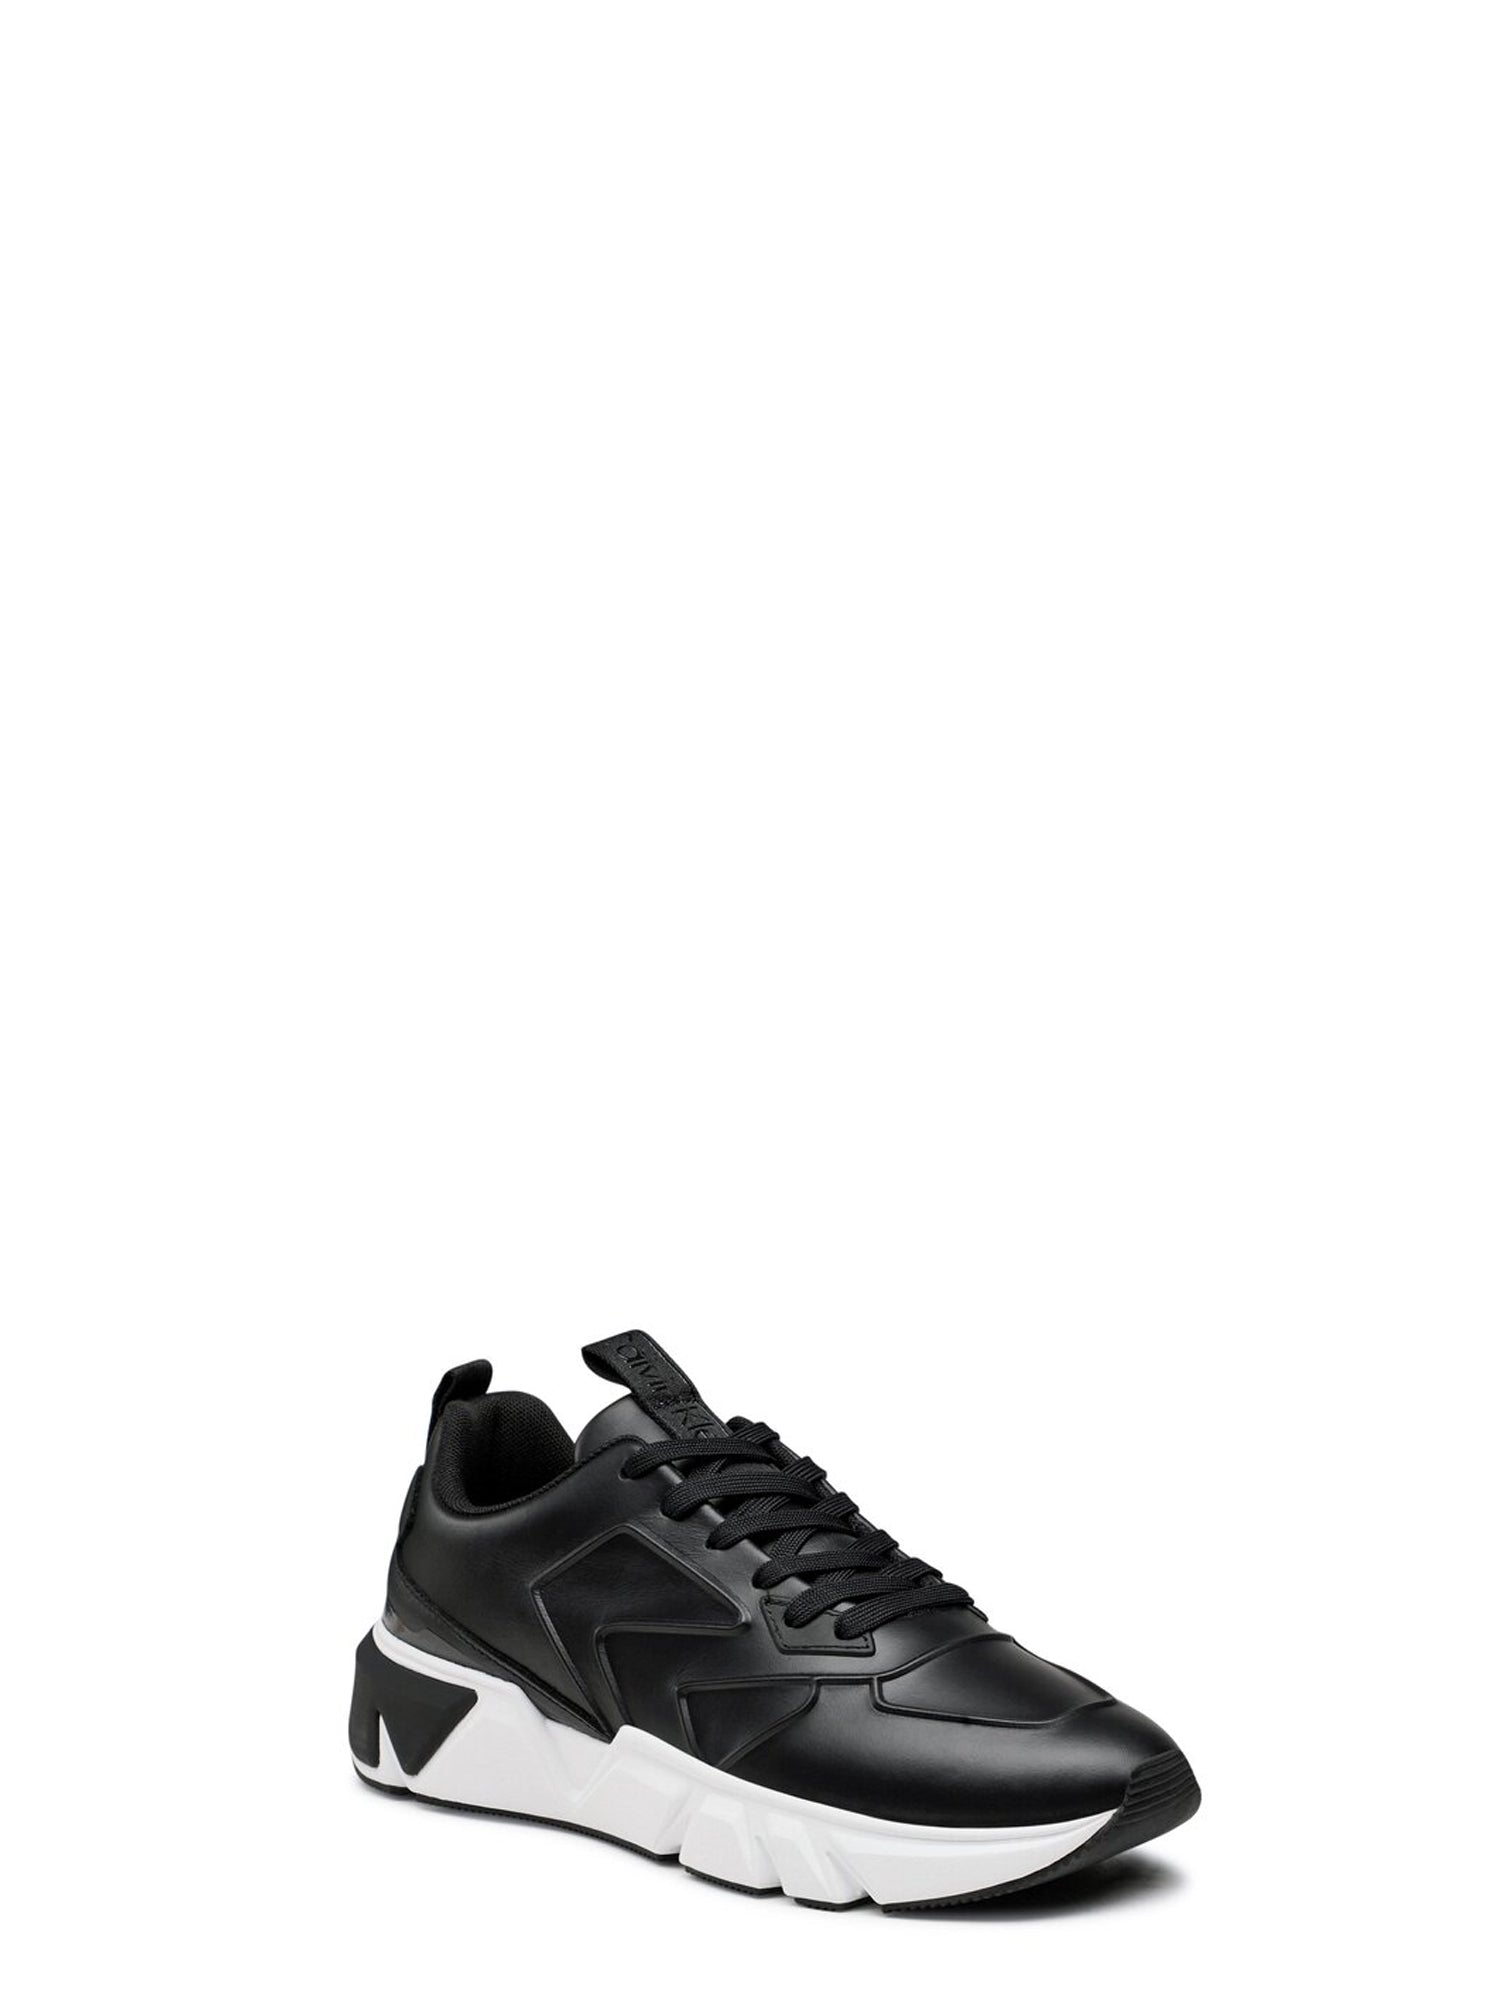 CALVIN KLEIN SHOES SNEAKERS LOW TOP LACE UP LTH NERO-BIANCO